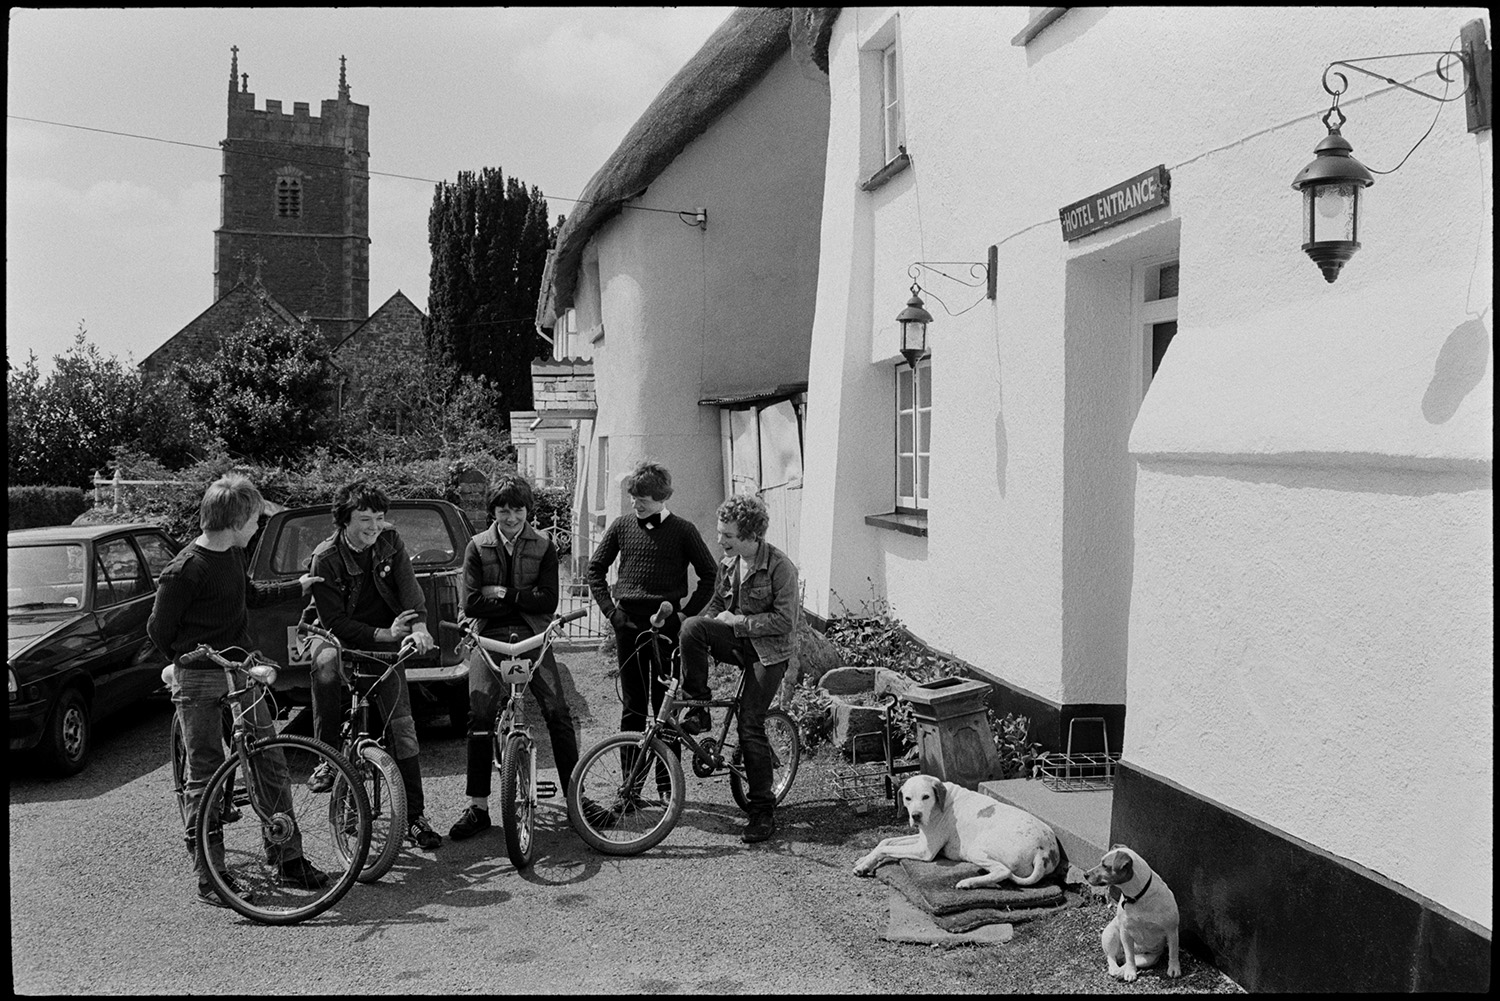 Club Day, people waiting before parade, drinking, playing cards. Boys on bicycles looking on.
[Boys on bicycles gathered outside the Duke of York Inn, on Iddesleigh Club Day. Two dogs are sitting in the sunshine by the doorstep and Iddesleigh Church tower is visible in the background.]